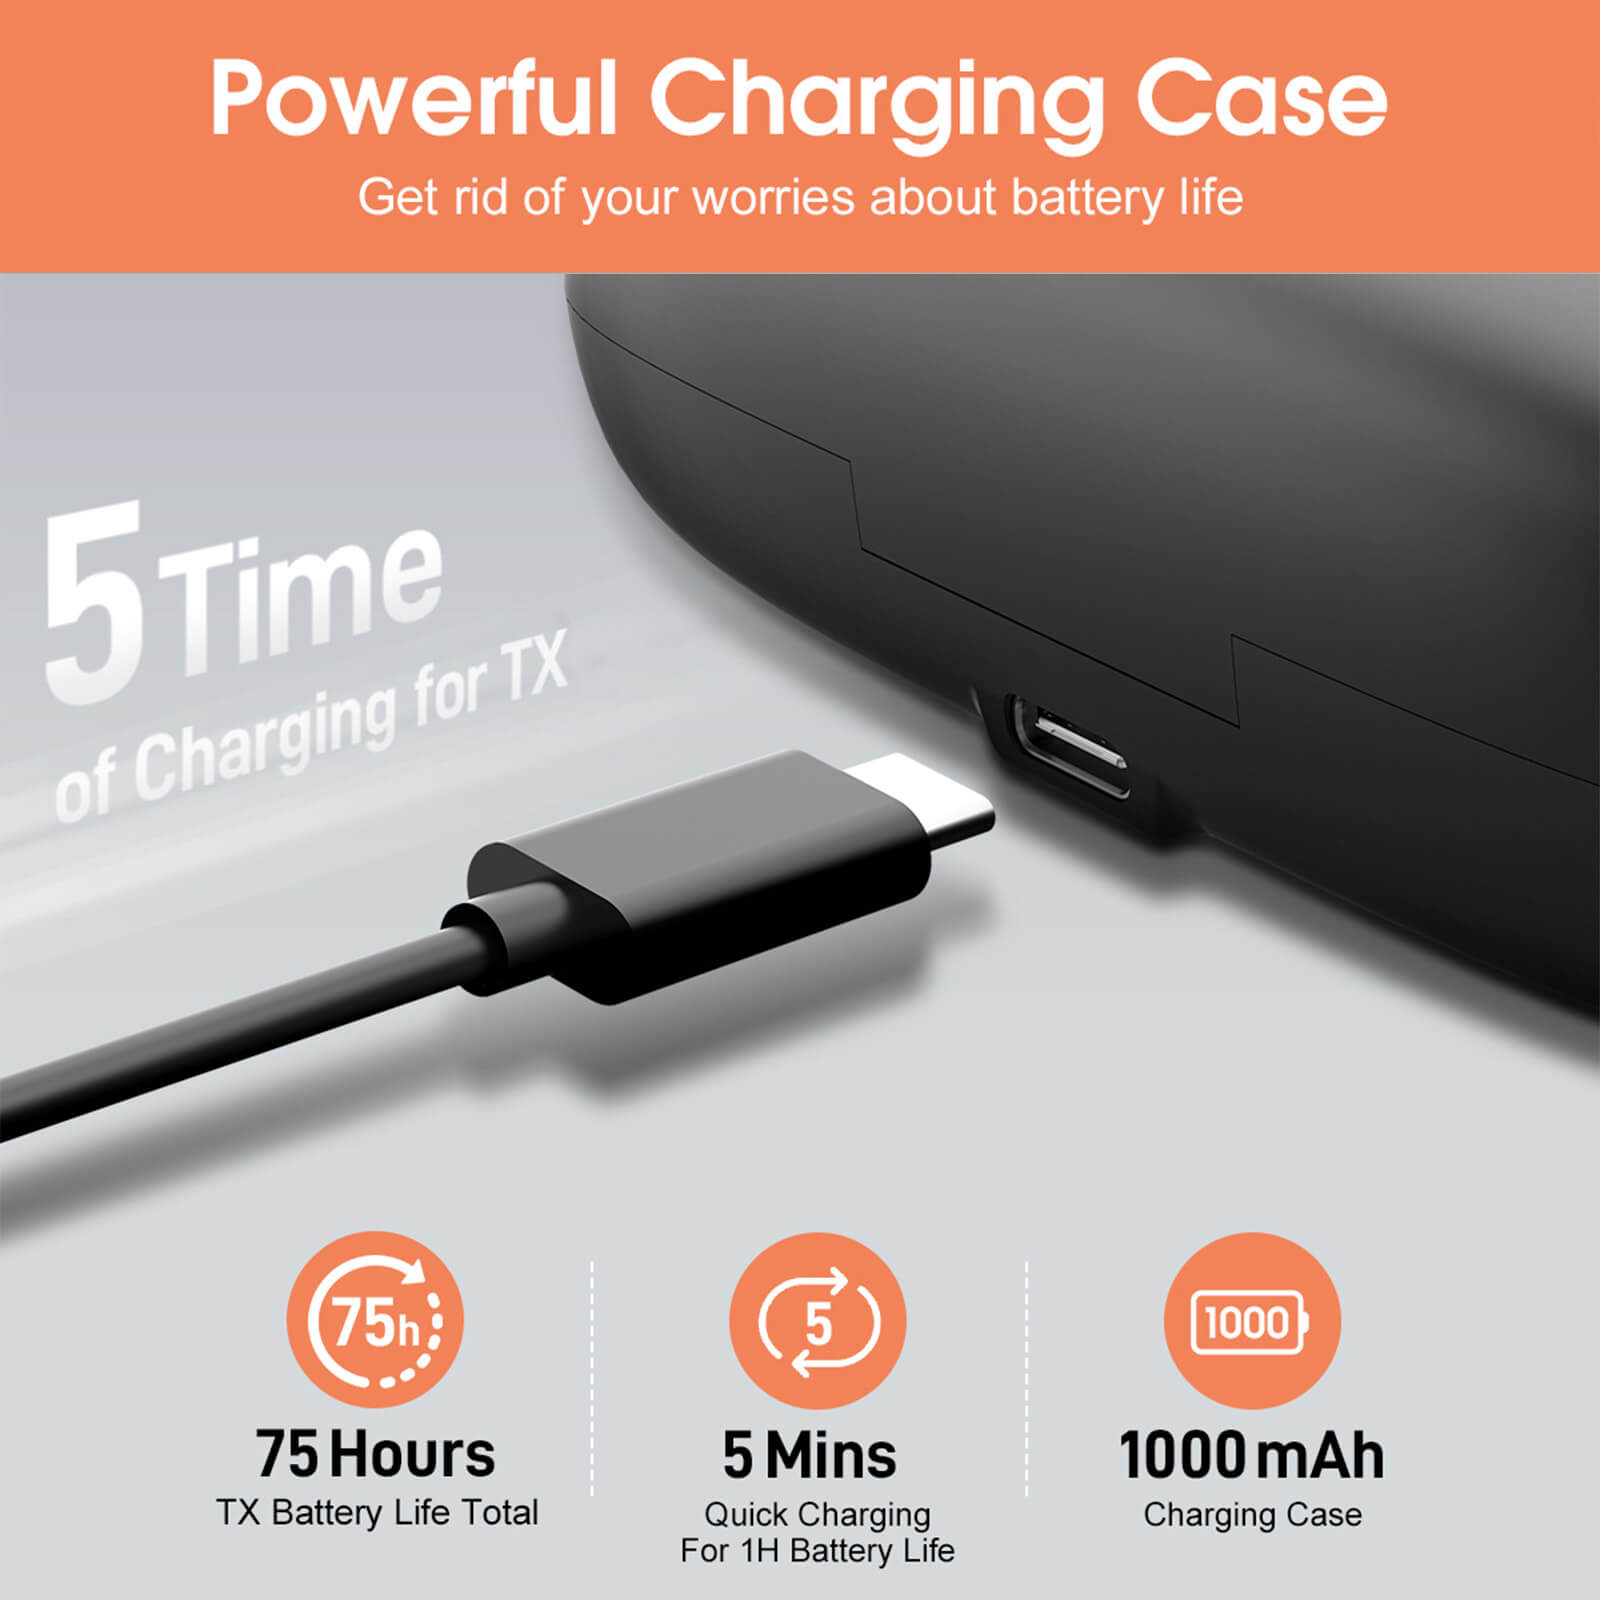 Moman CP2 with powerful charging case is suitable for long-time live streaming